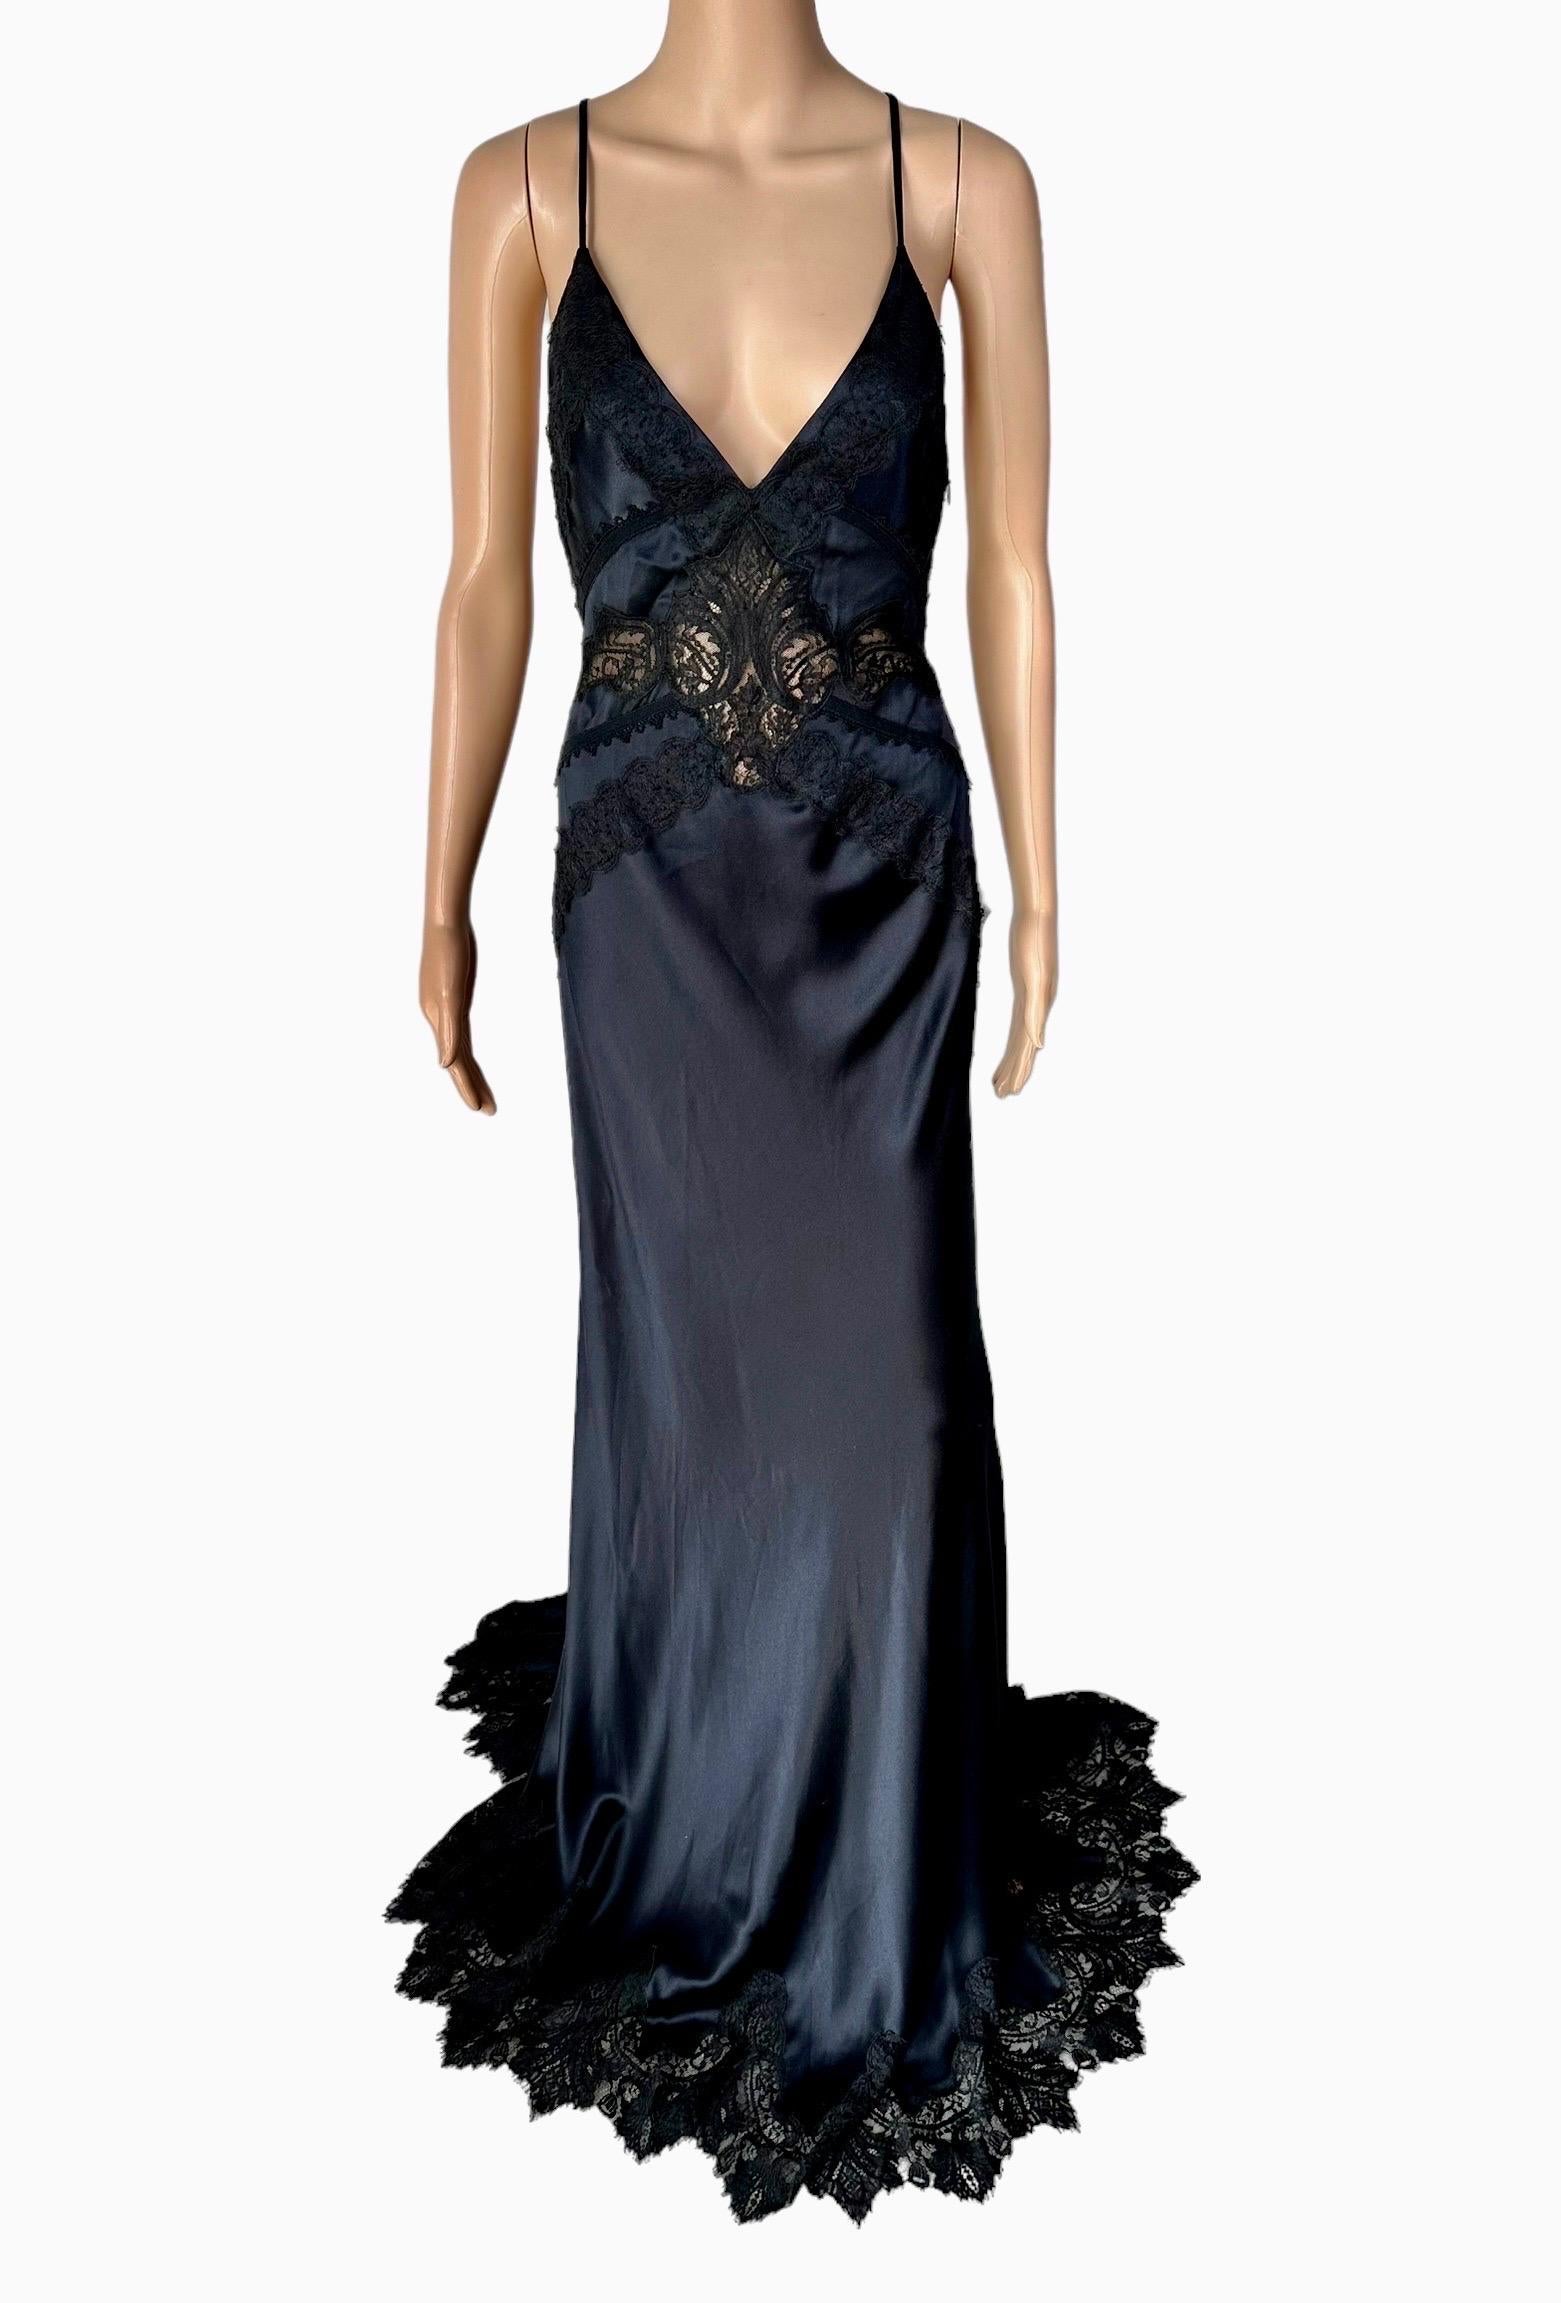 Versace c.2006 Plunging Neckline Sheer Lace Panels Backless Evening Dress Gown  5